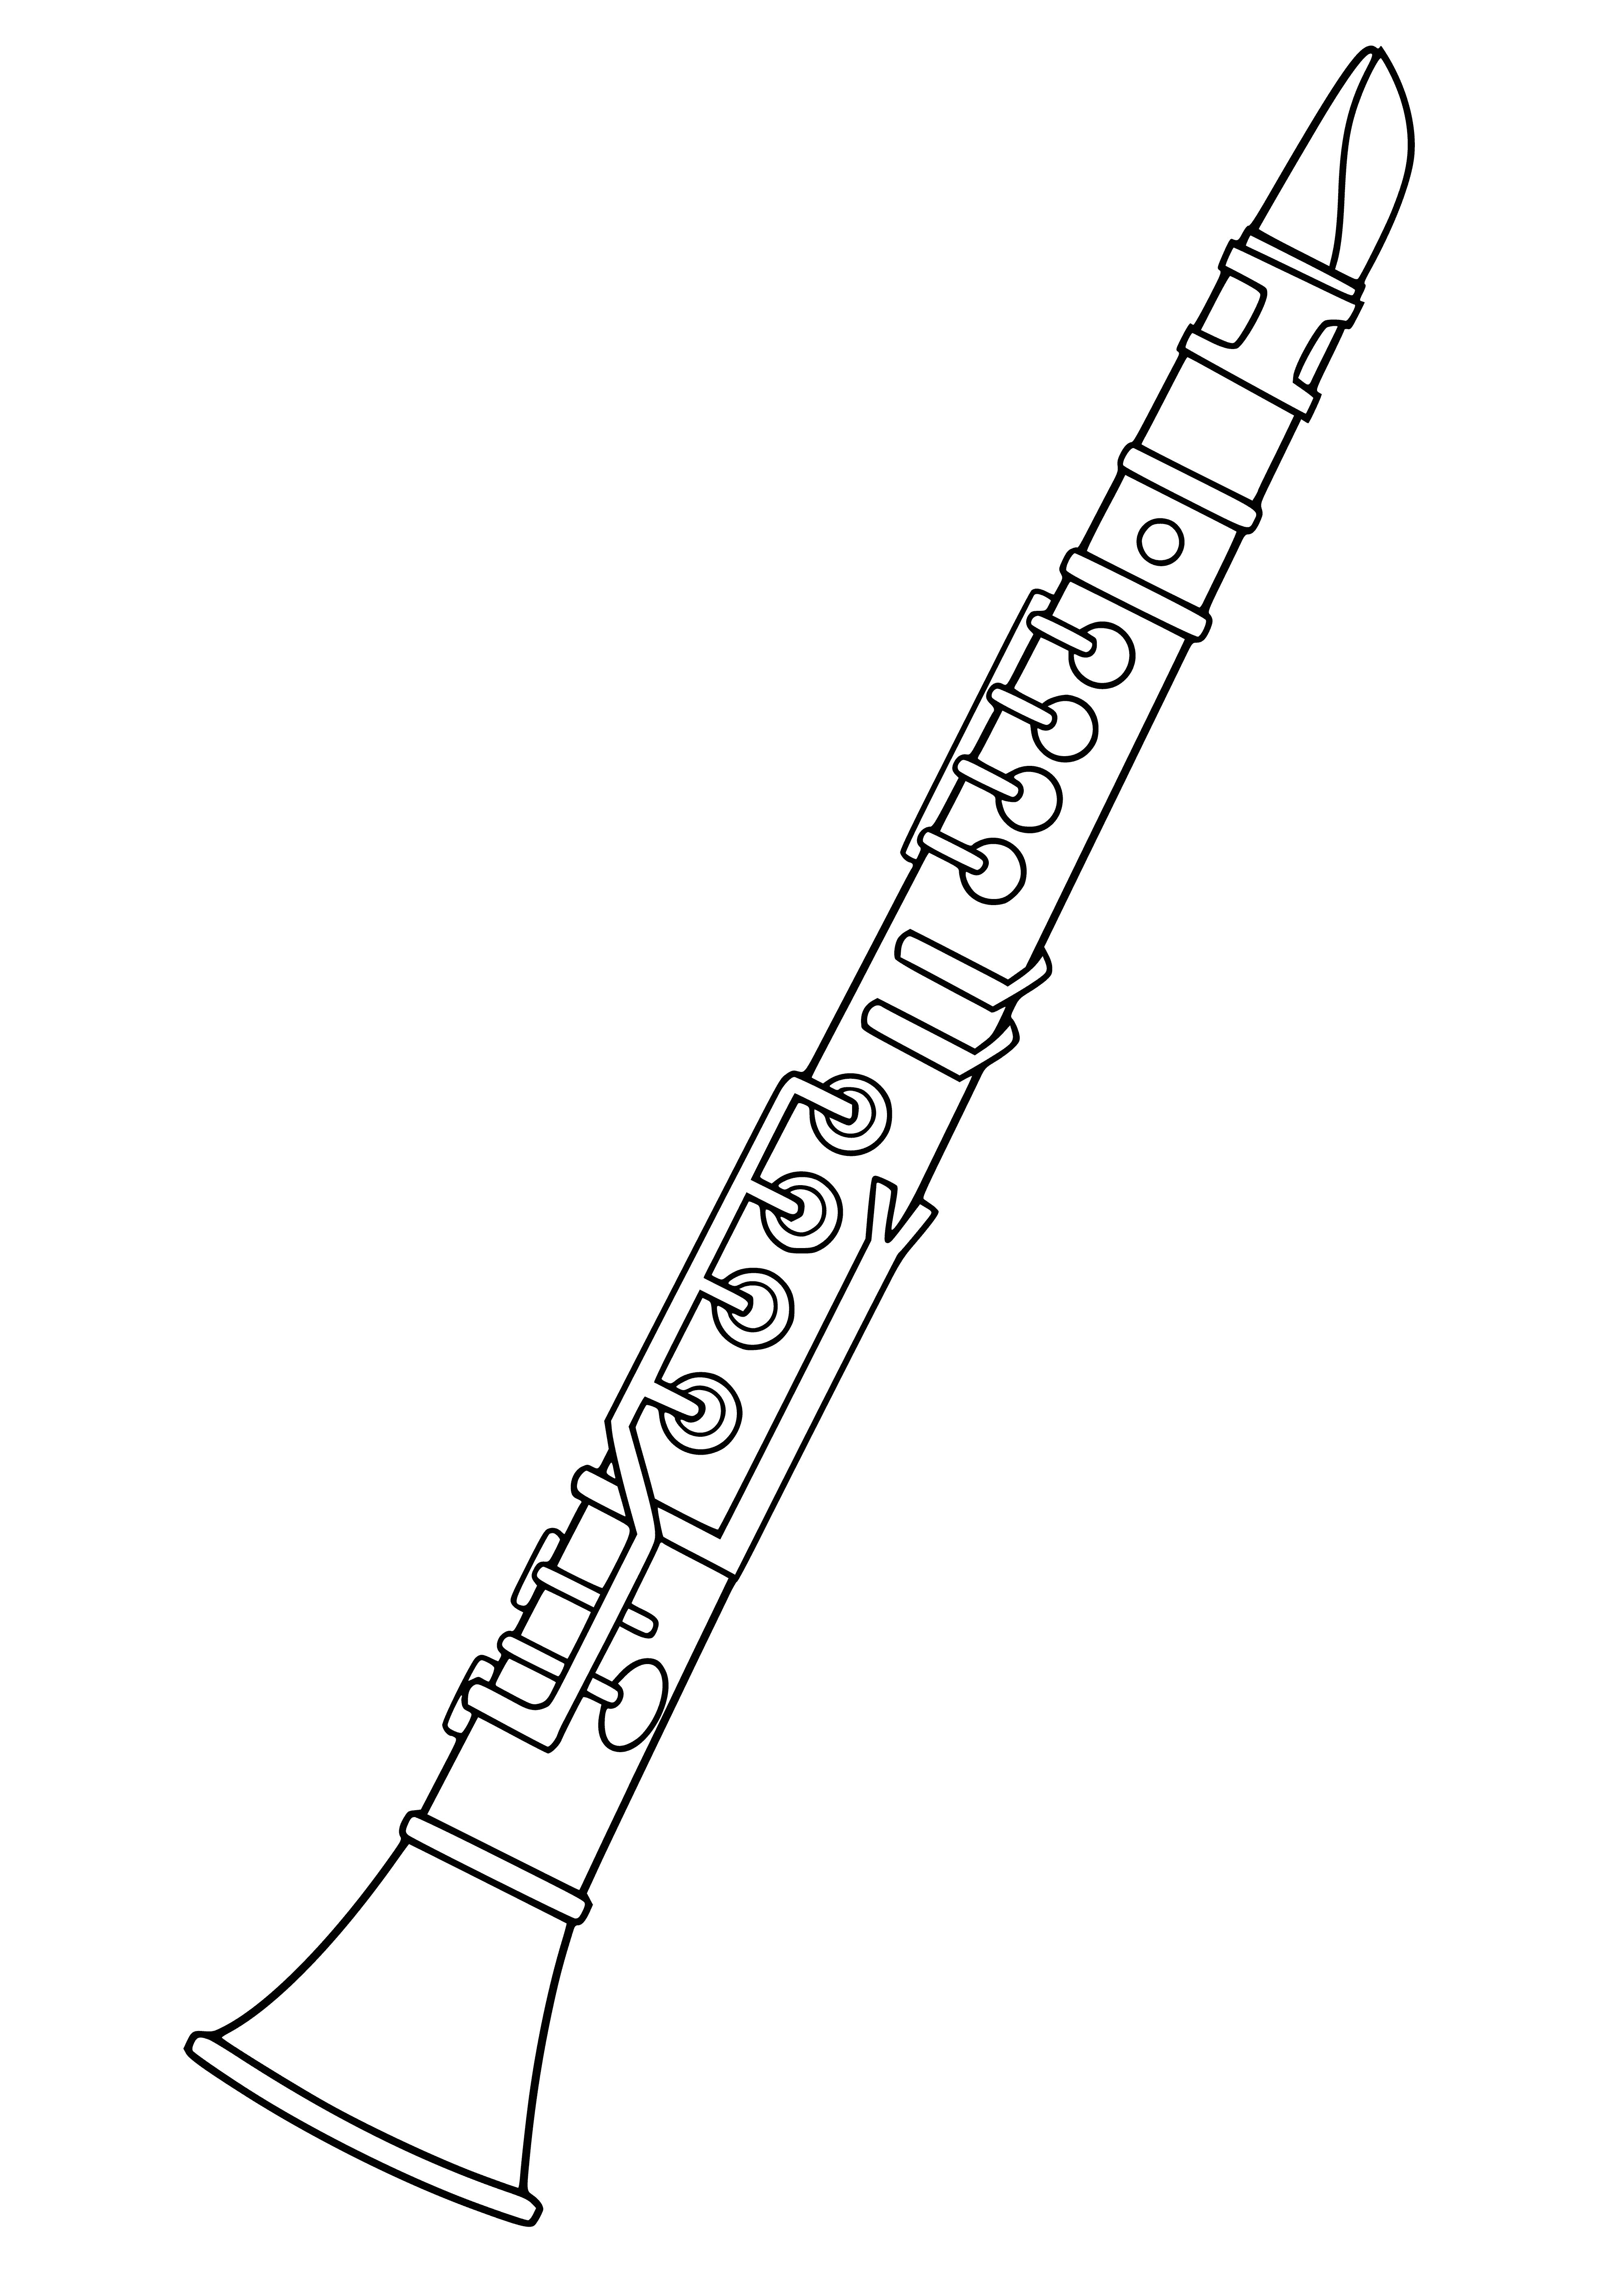 Clarinet coloring page